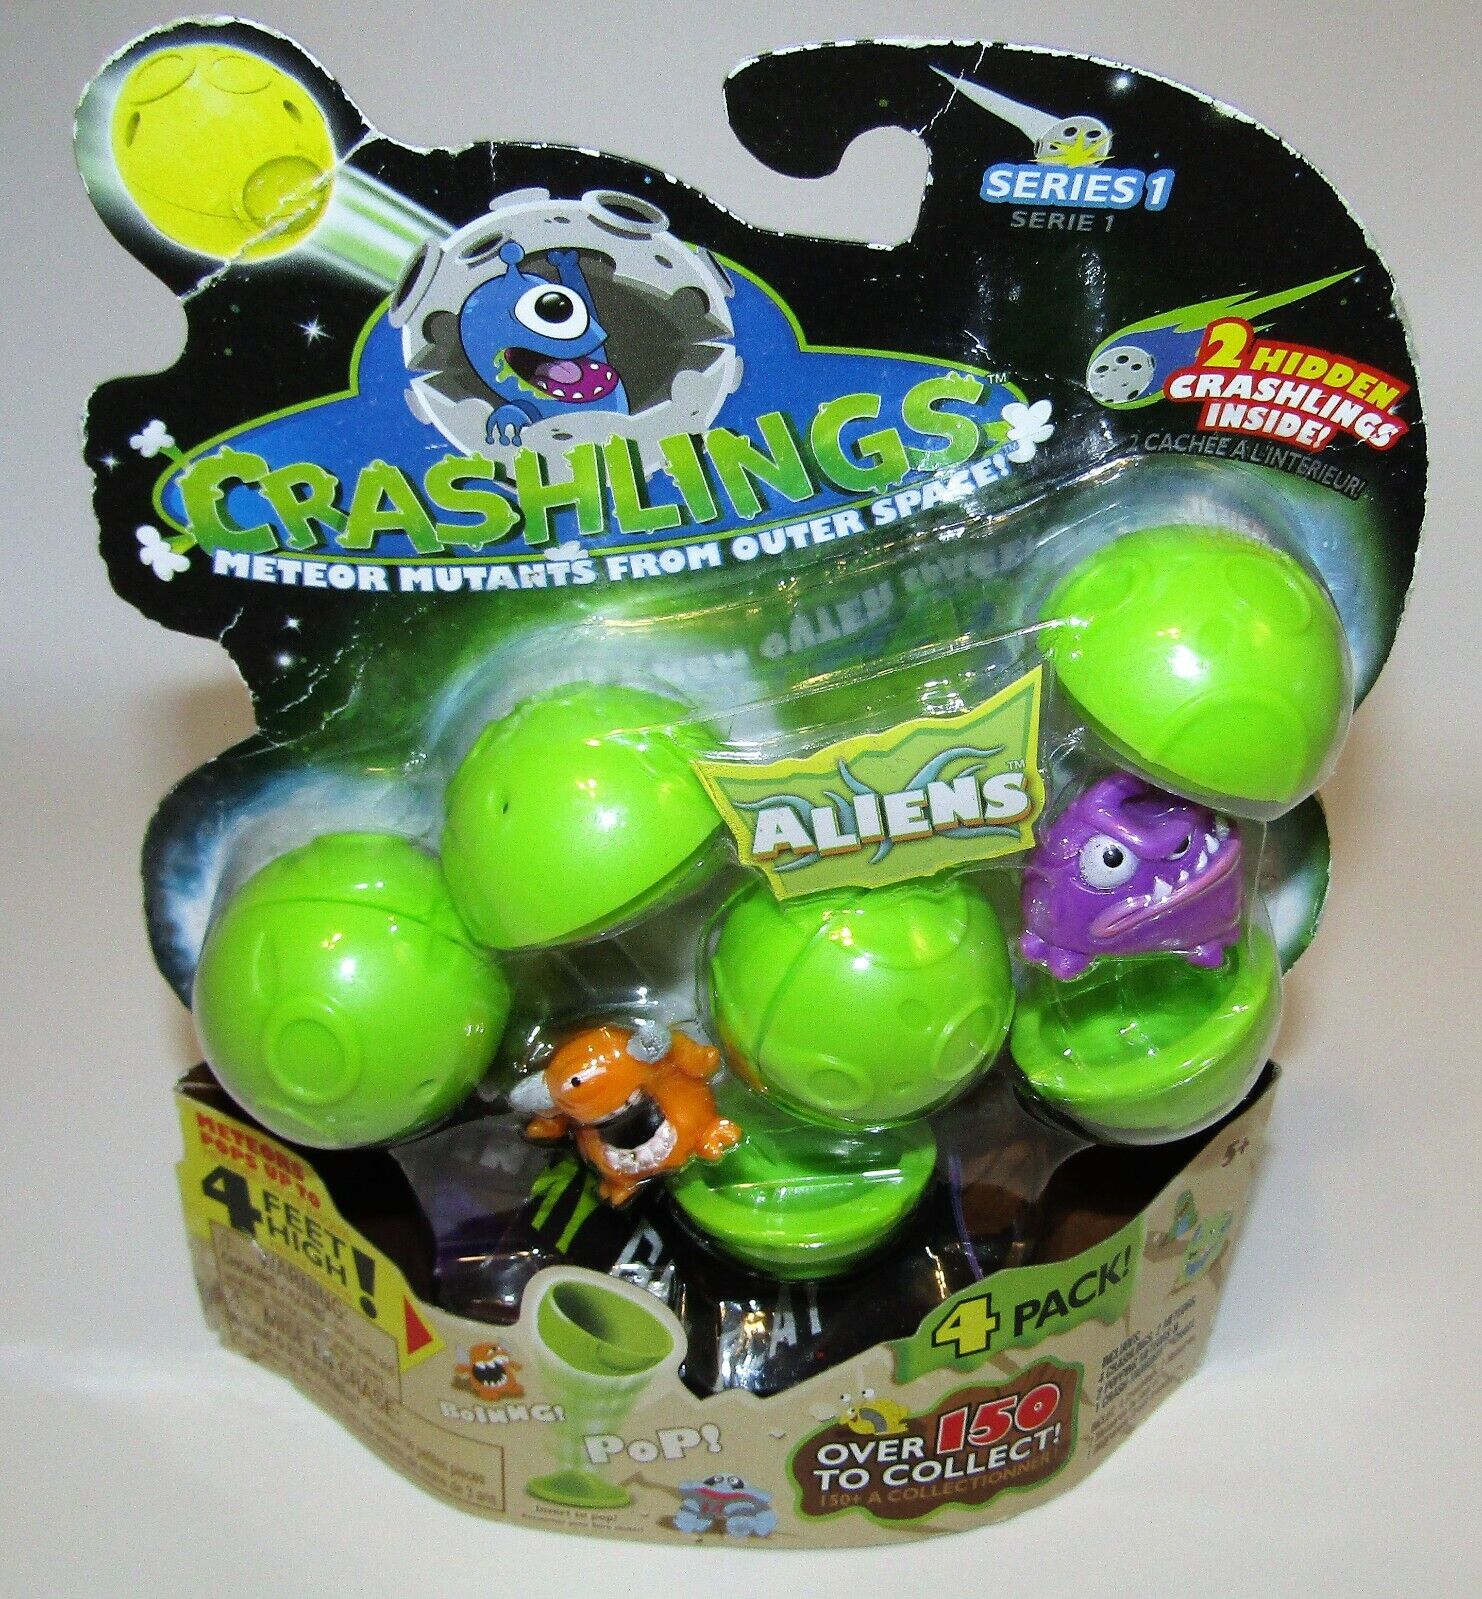 2014 CRASHLINGS METEOR MUTANTS FROM OUTER SPACE ALIENS 4 PACK NEW